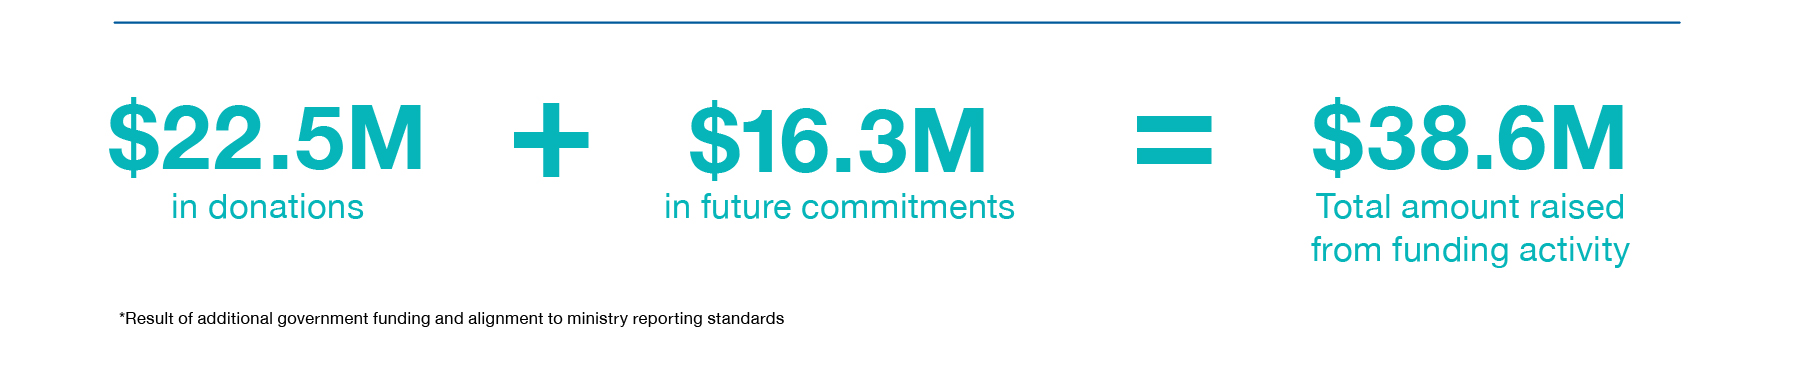 $22.5M in donations + $16.3 in future commitments = $38.6M Total amount raised from funding activity